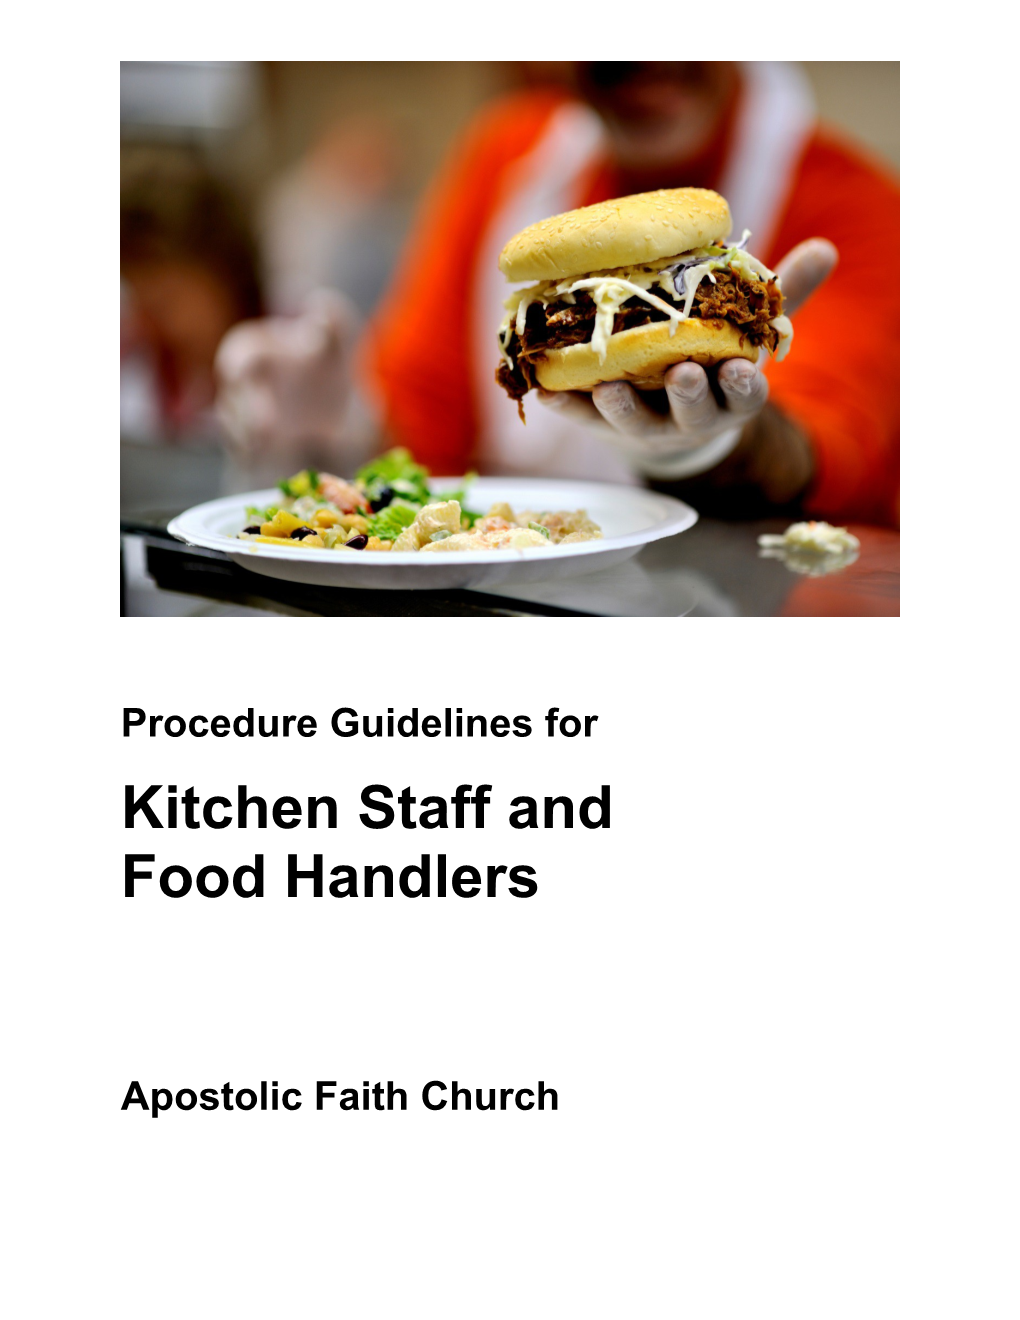 Procedure Guidelines for Kitchen Staff and Food Handlers